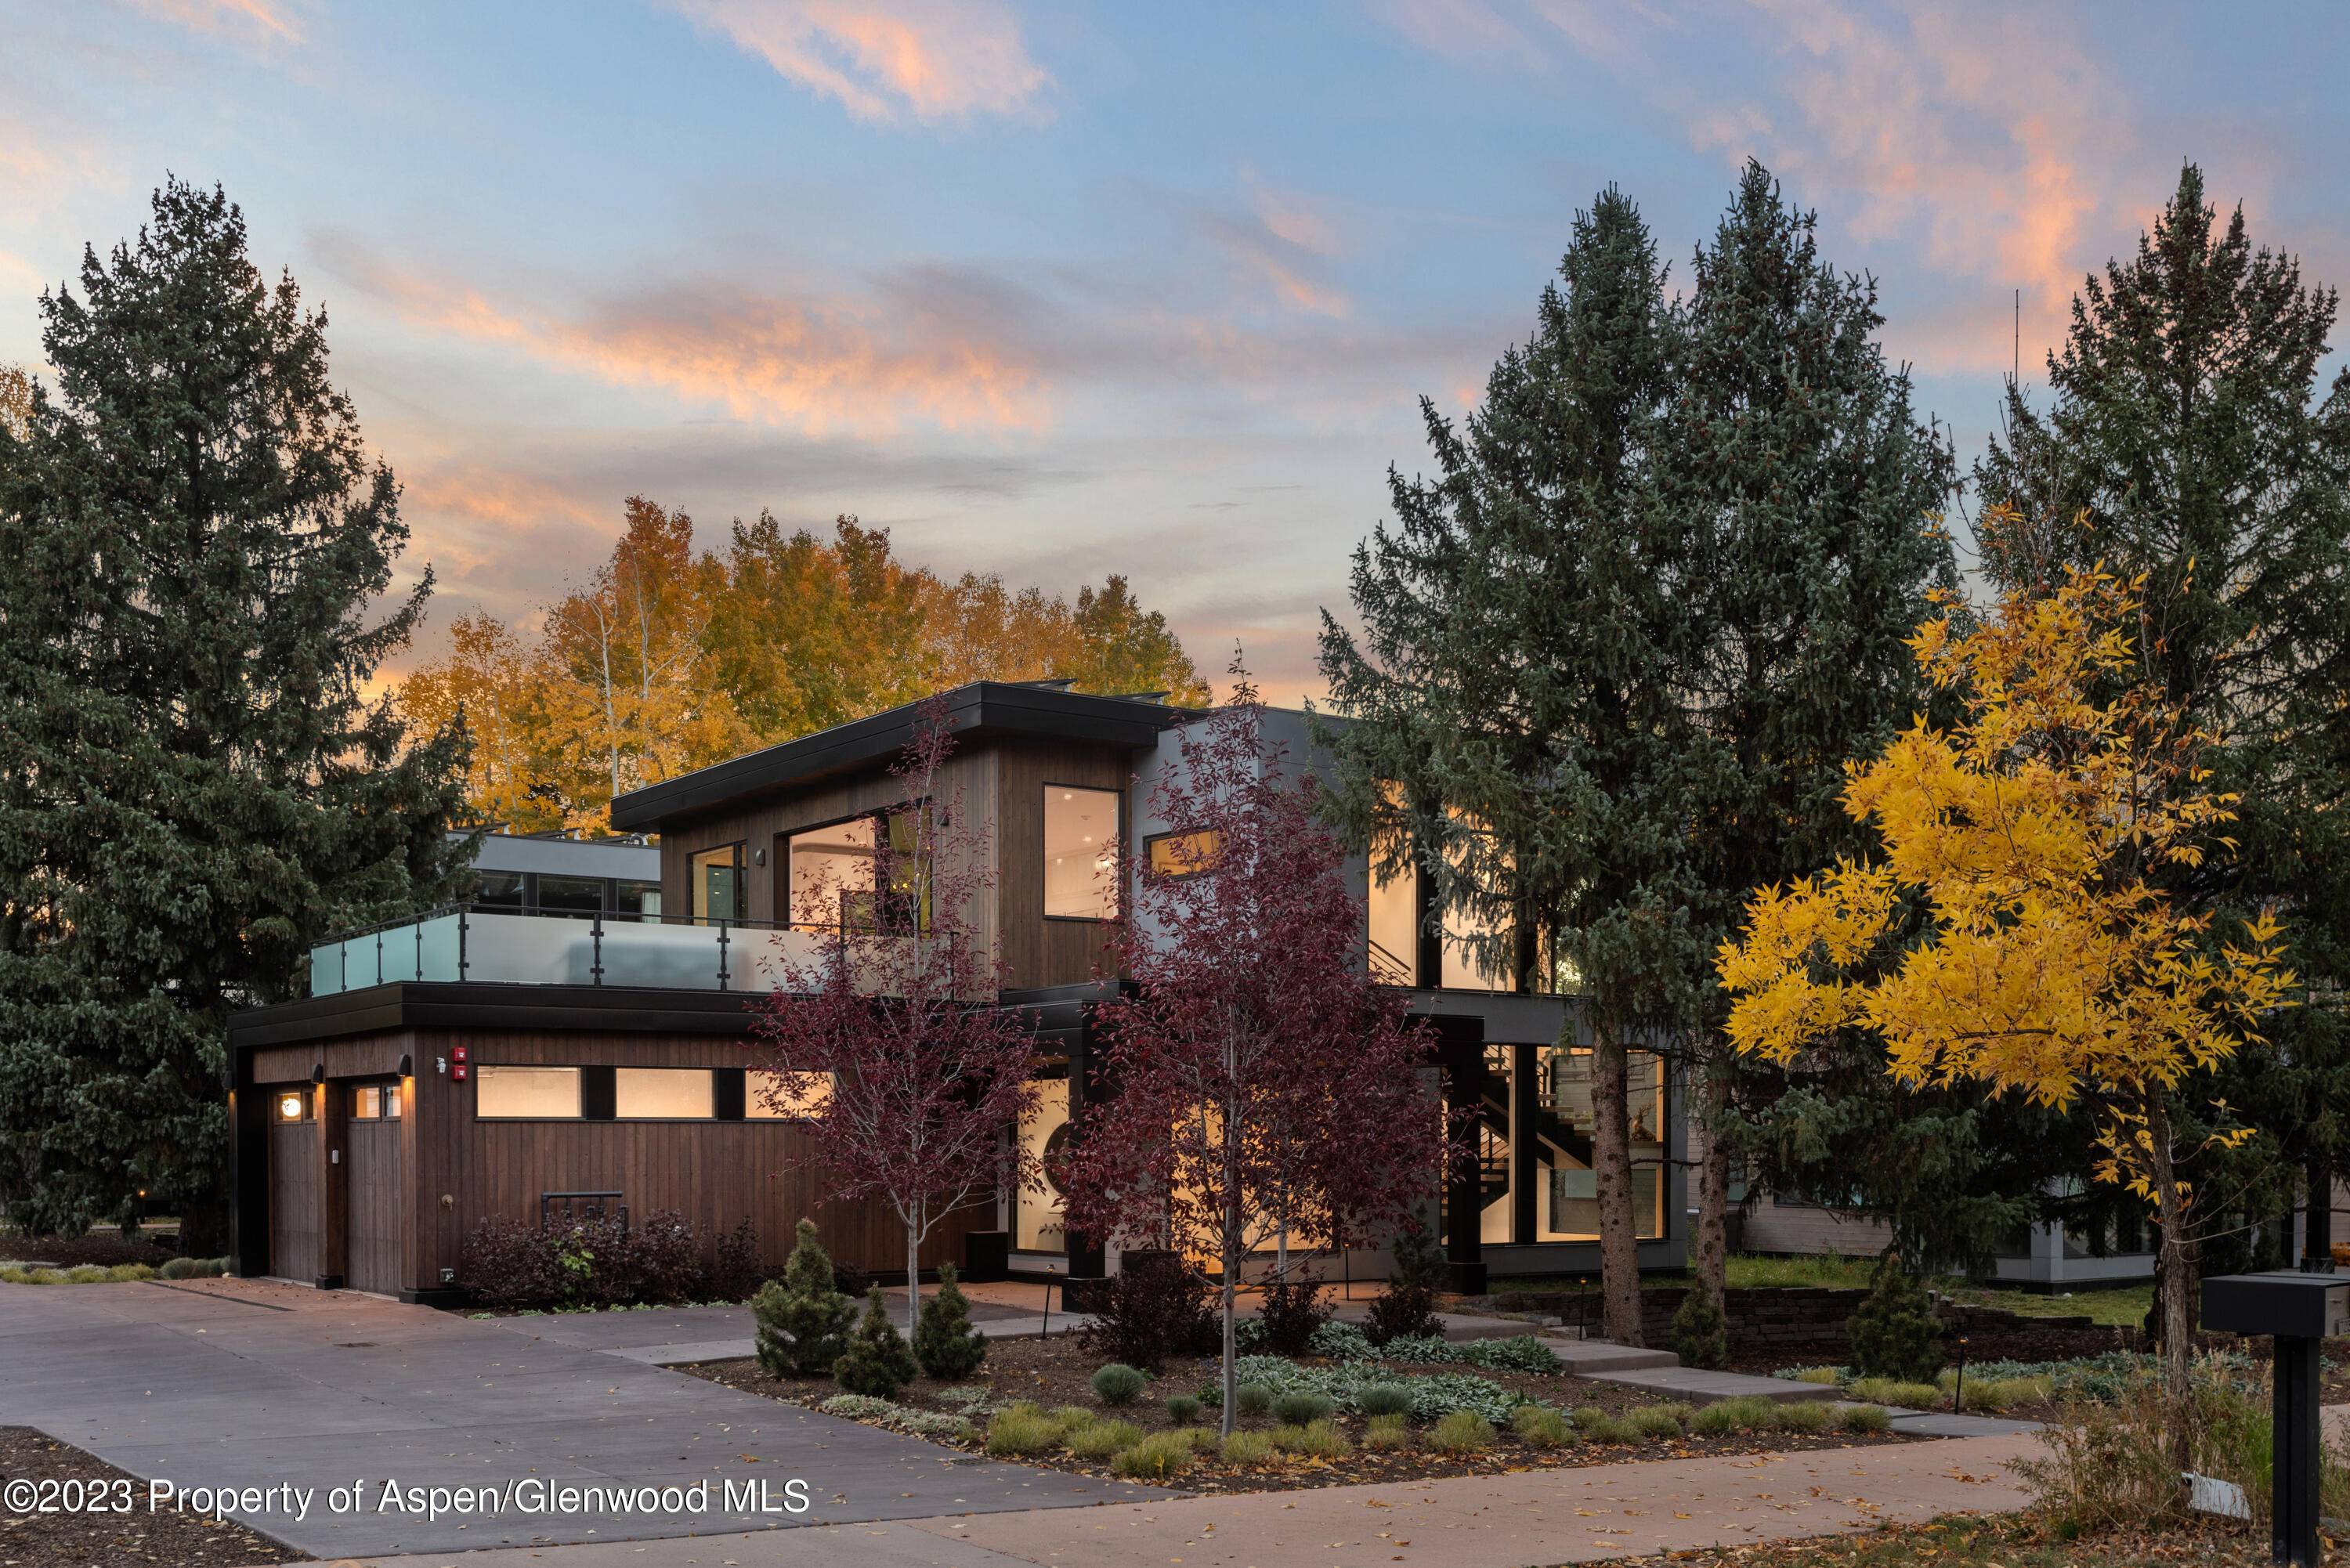 721 Cemetery Lane is the epitome of contemporary luxury living in Aspen.